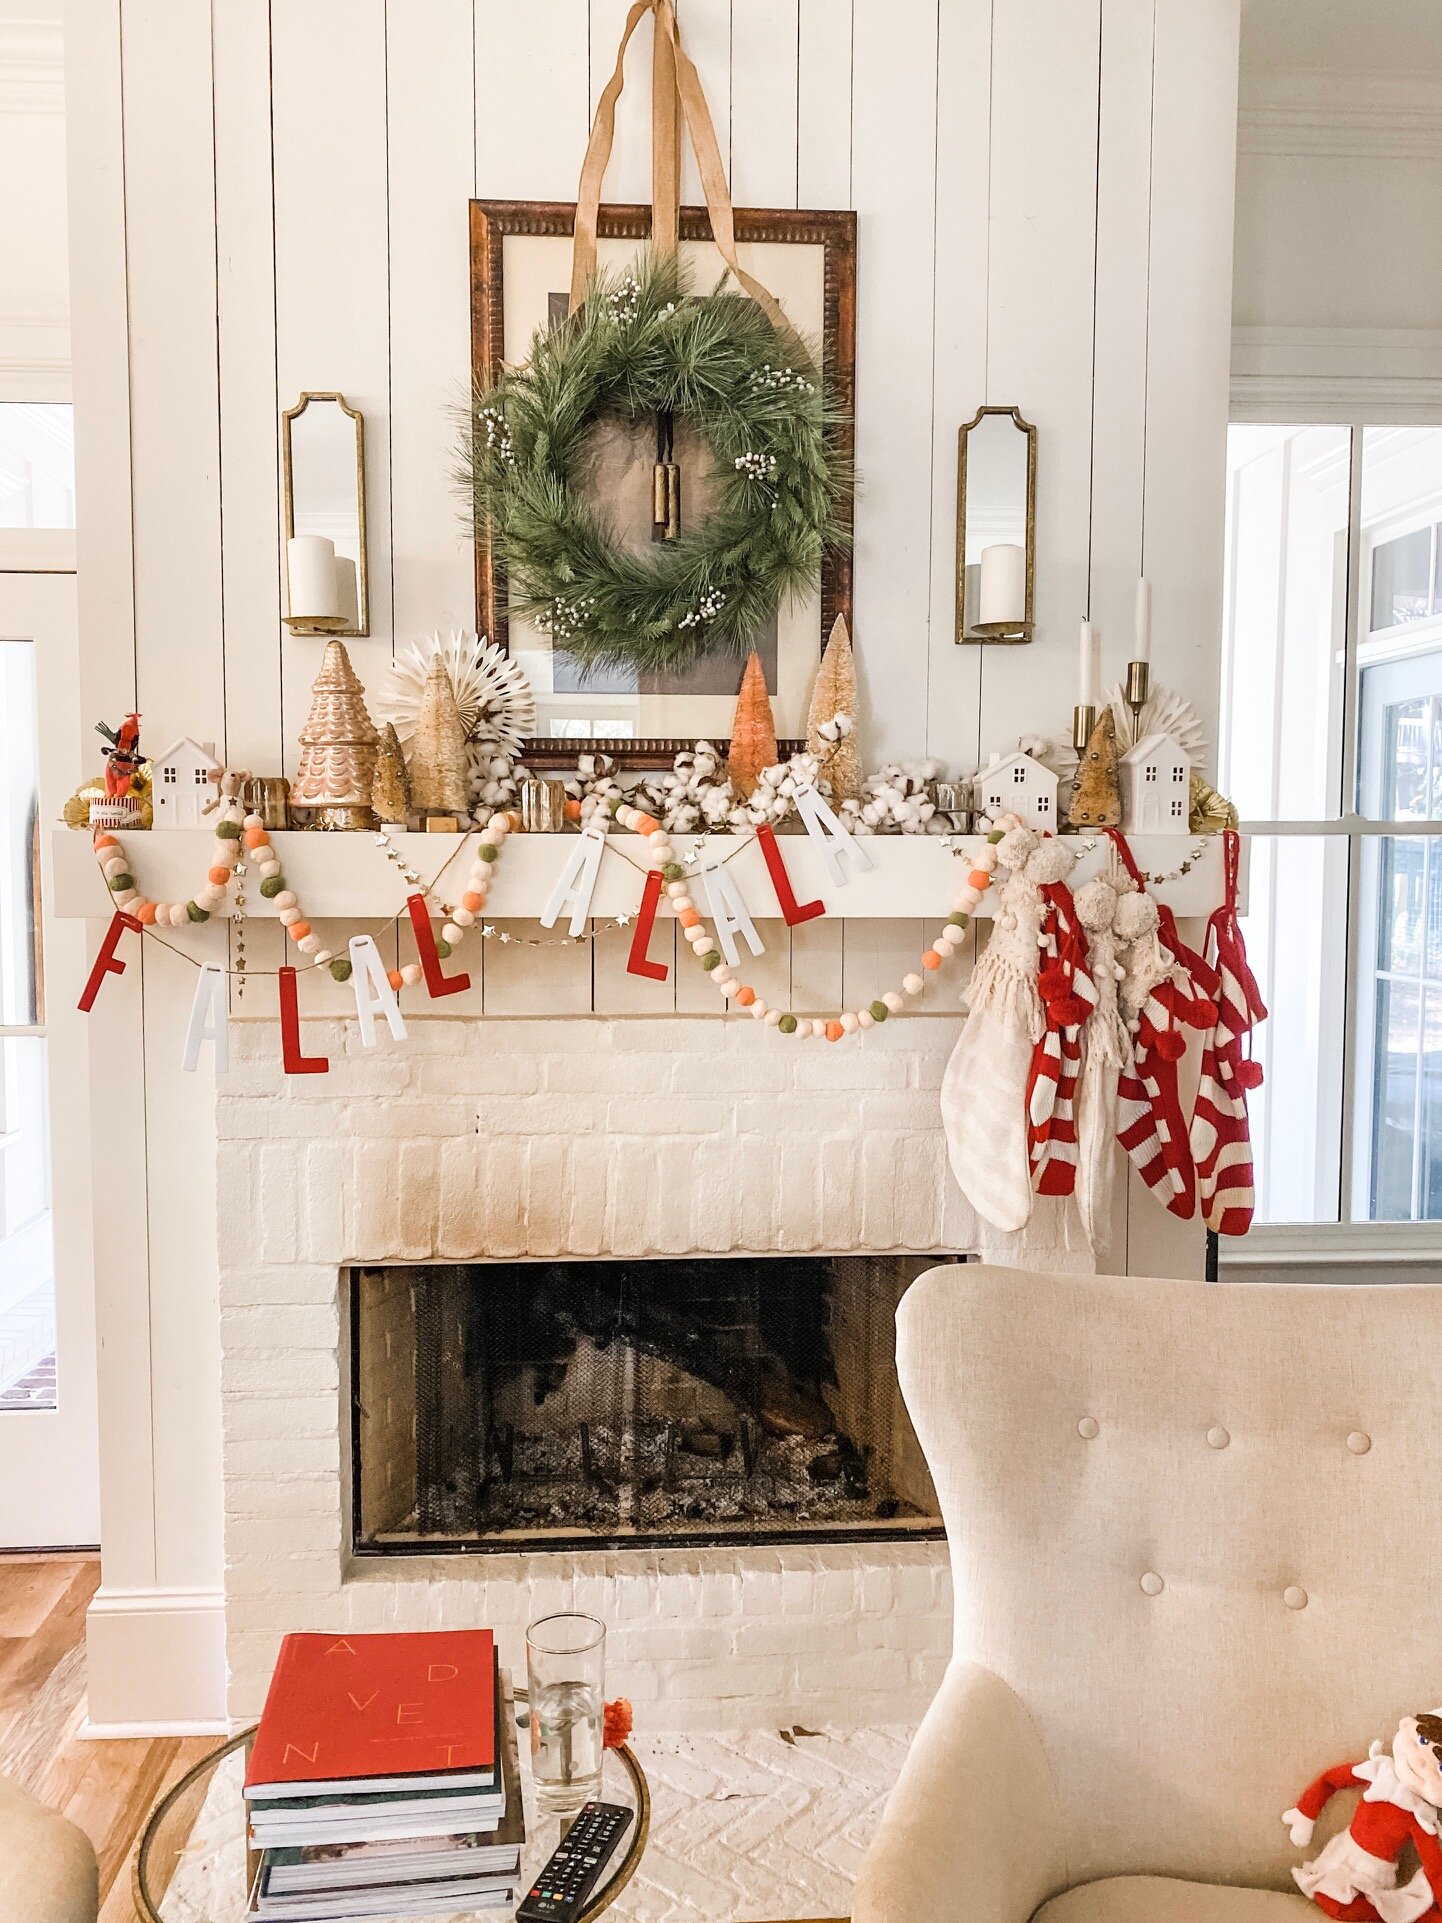 Holiday Home Tour 2019 — Lesley W Graham